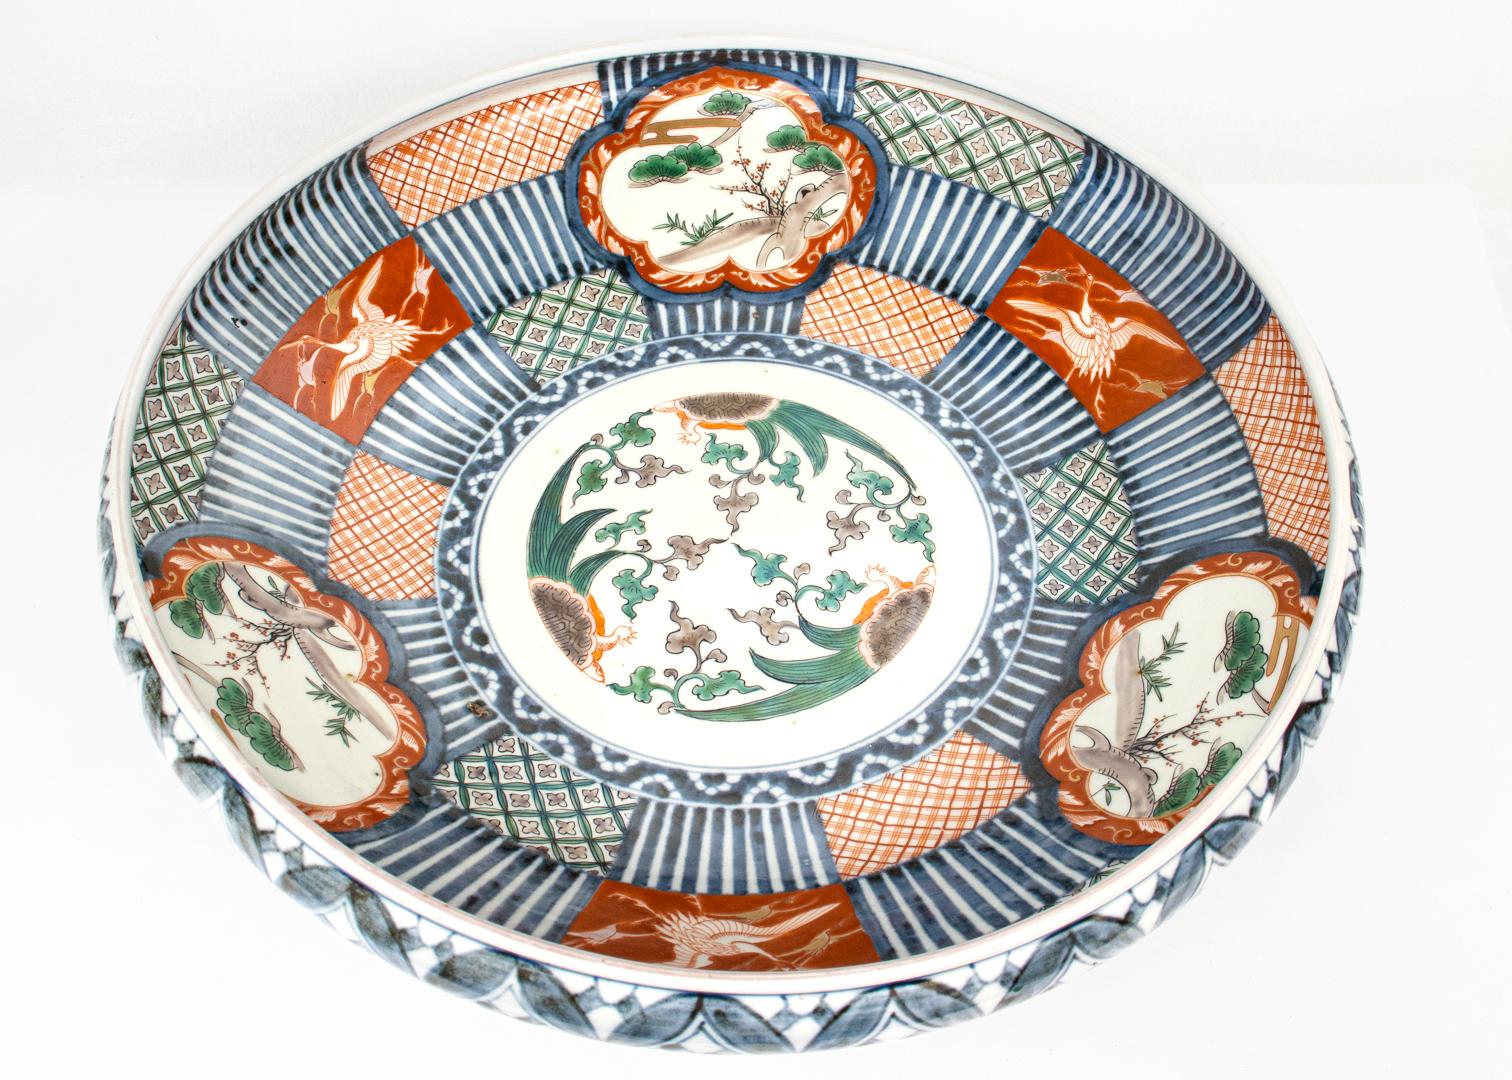 A fine Japanese Imari porcelain bowl.

In a very large, low walled form.

With typical blue underglaze decoration and red, salmon, green, and brown cold-painted decoration throughout.

The bowl is slightly out-of-round and the side walls vary